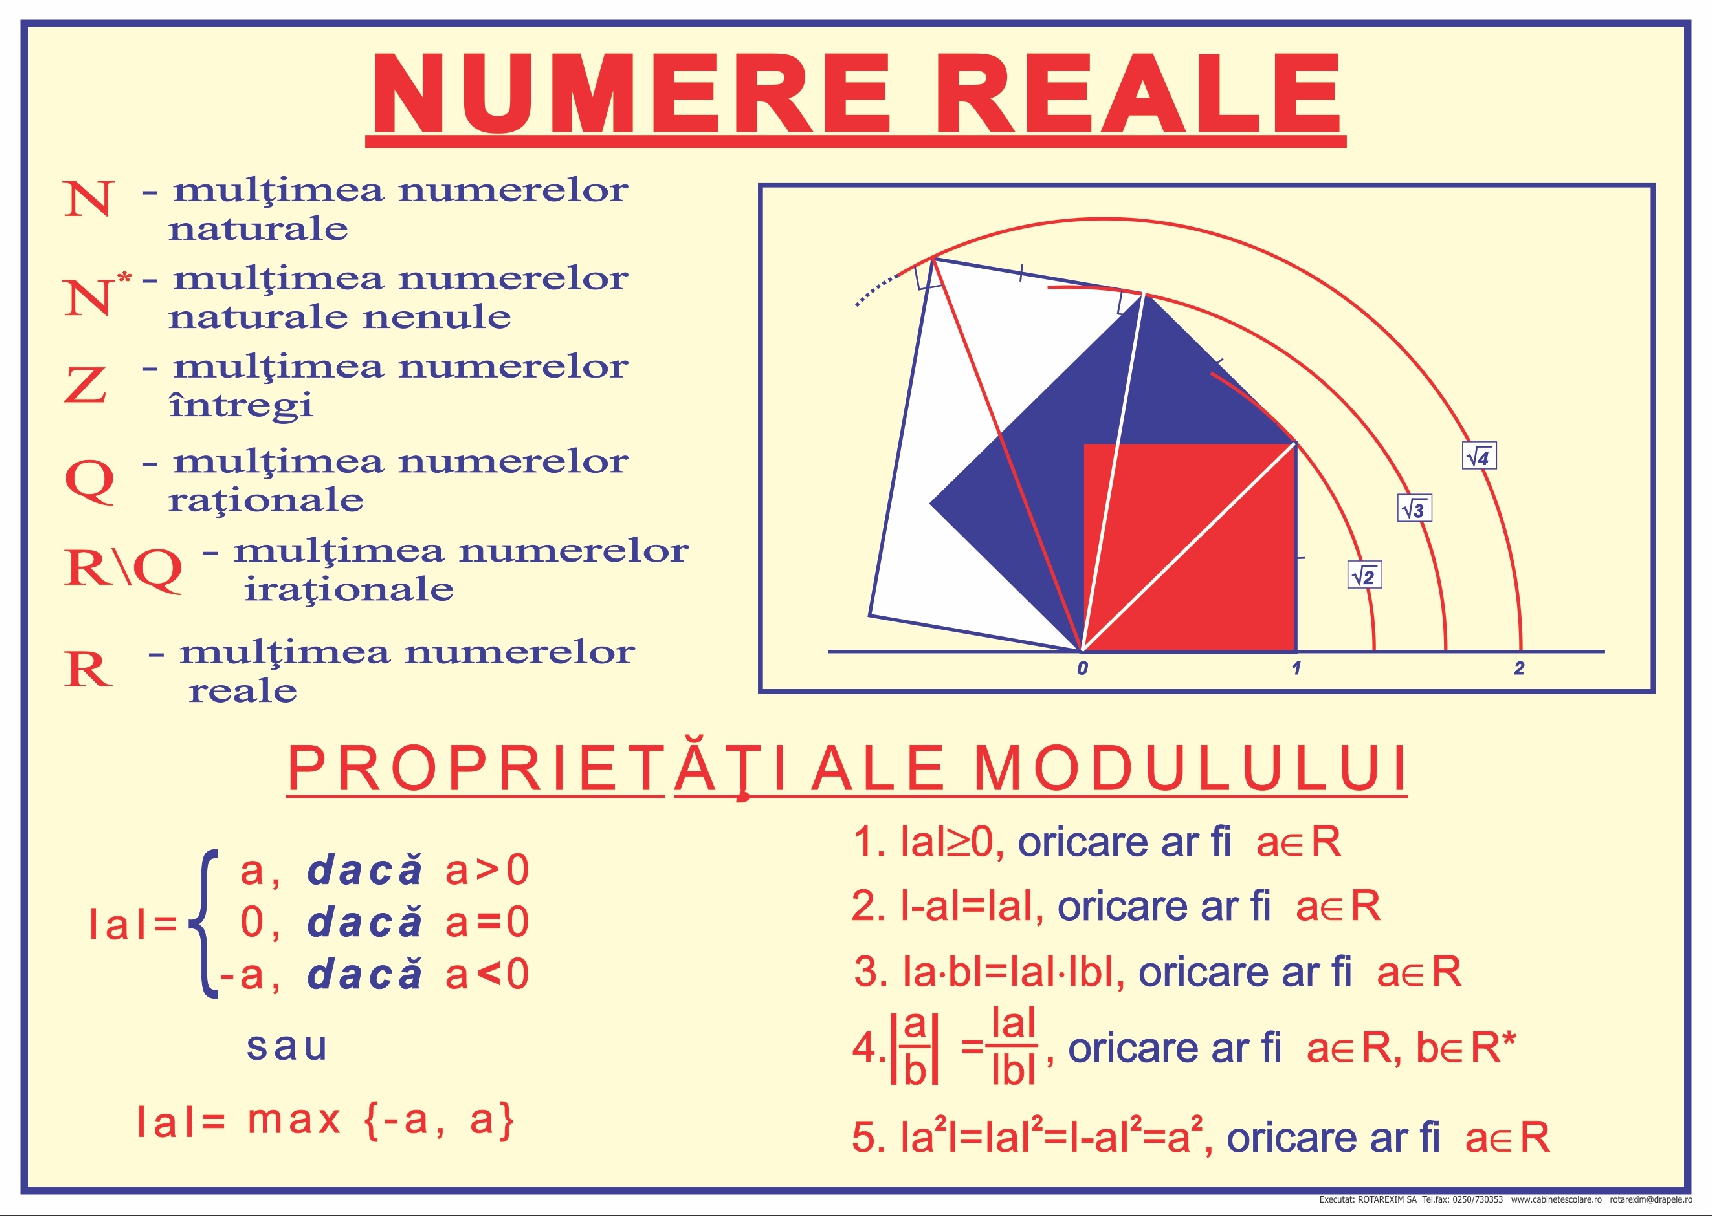 Numere reale.